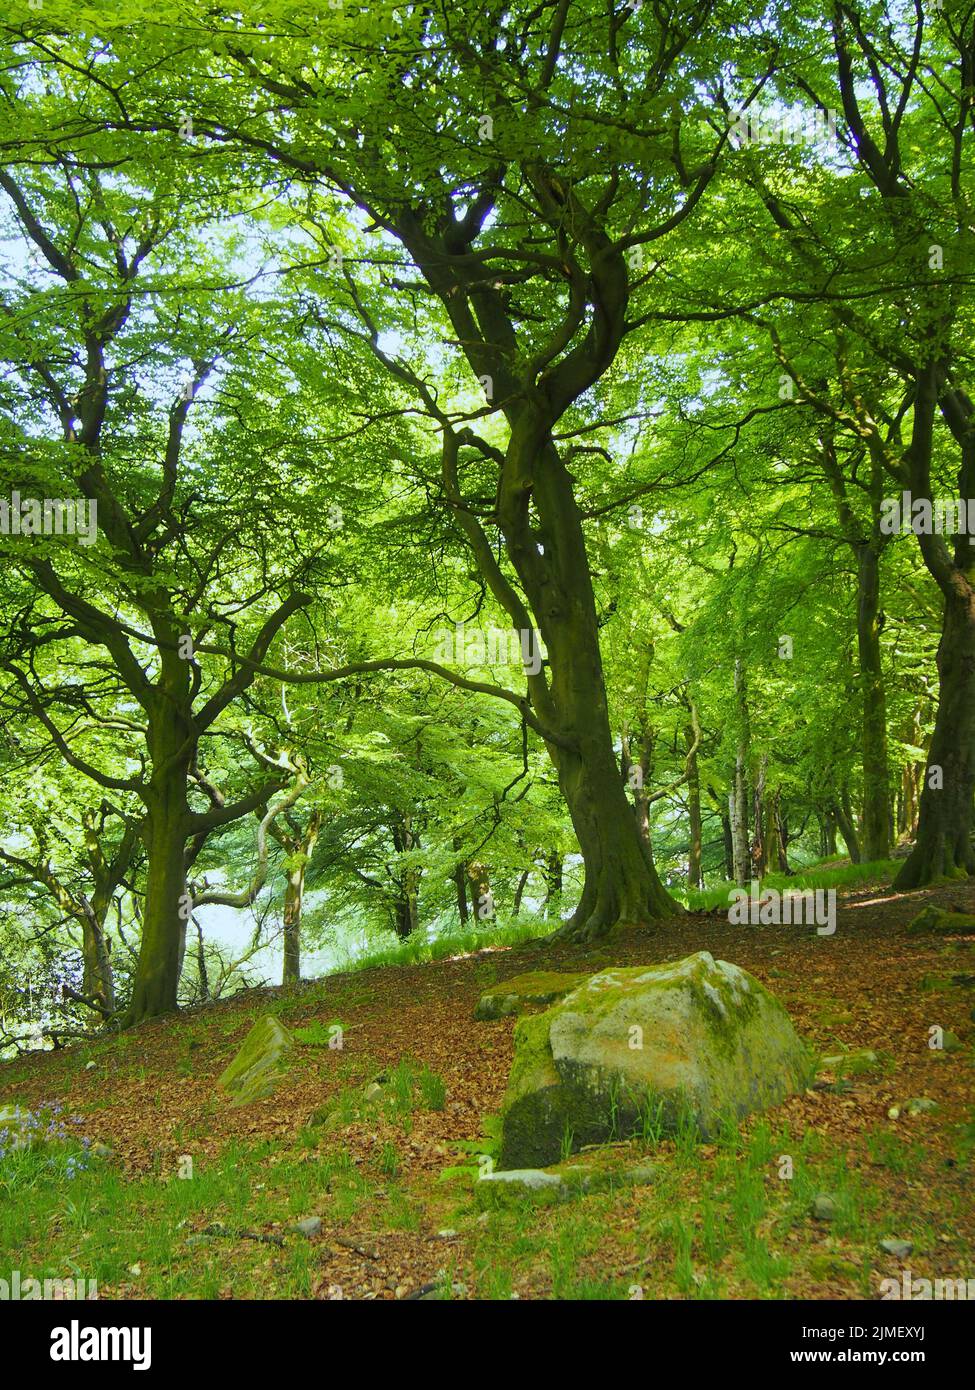 Forest with large beech trees with leaves illuminated by bright morning sunshine and boulders on the ground Stock Photo